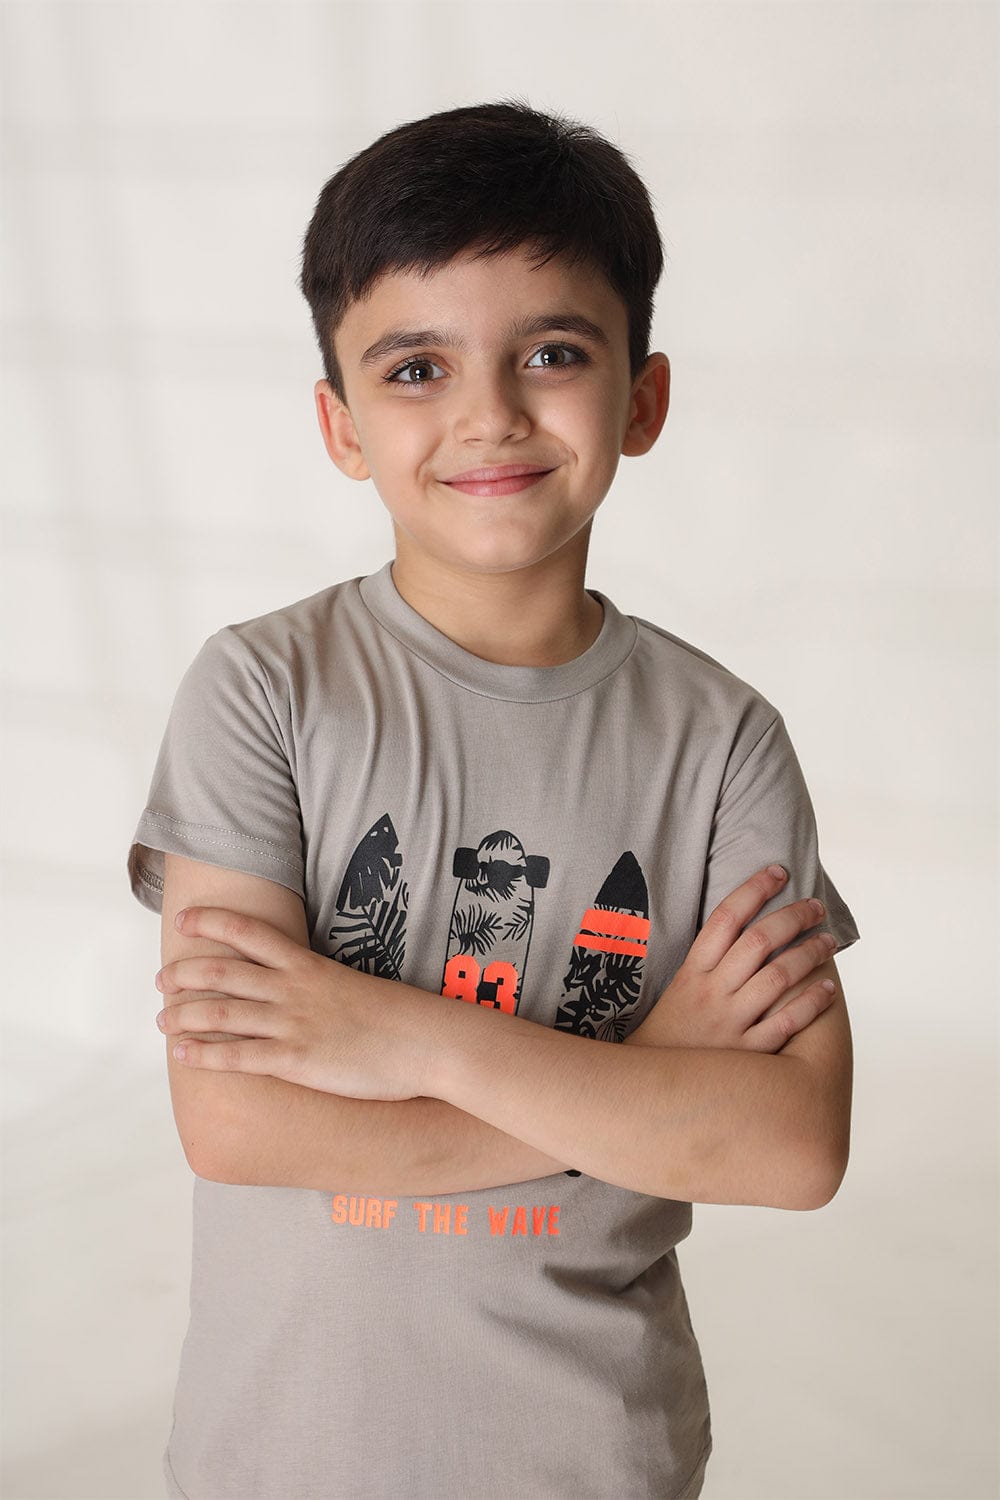 Hope Not Out by Shahid Afridi Boys Knit T-Shirt Skateboard Graphic Grey Half Sleeve T-Shirt for Boys